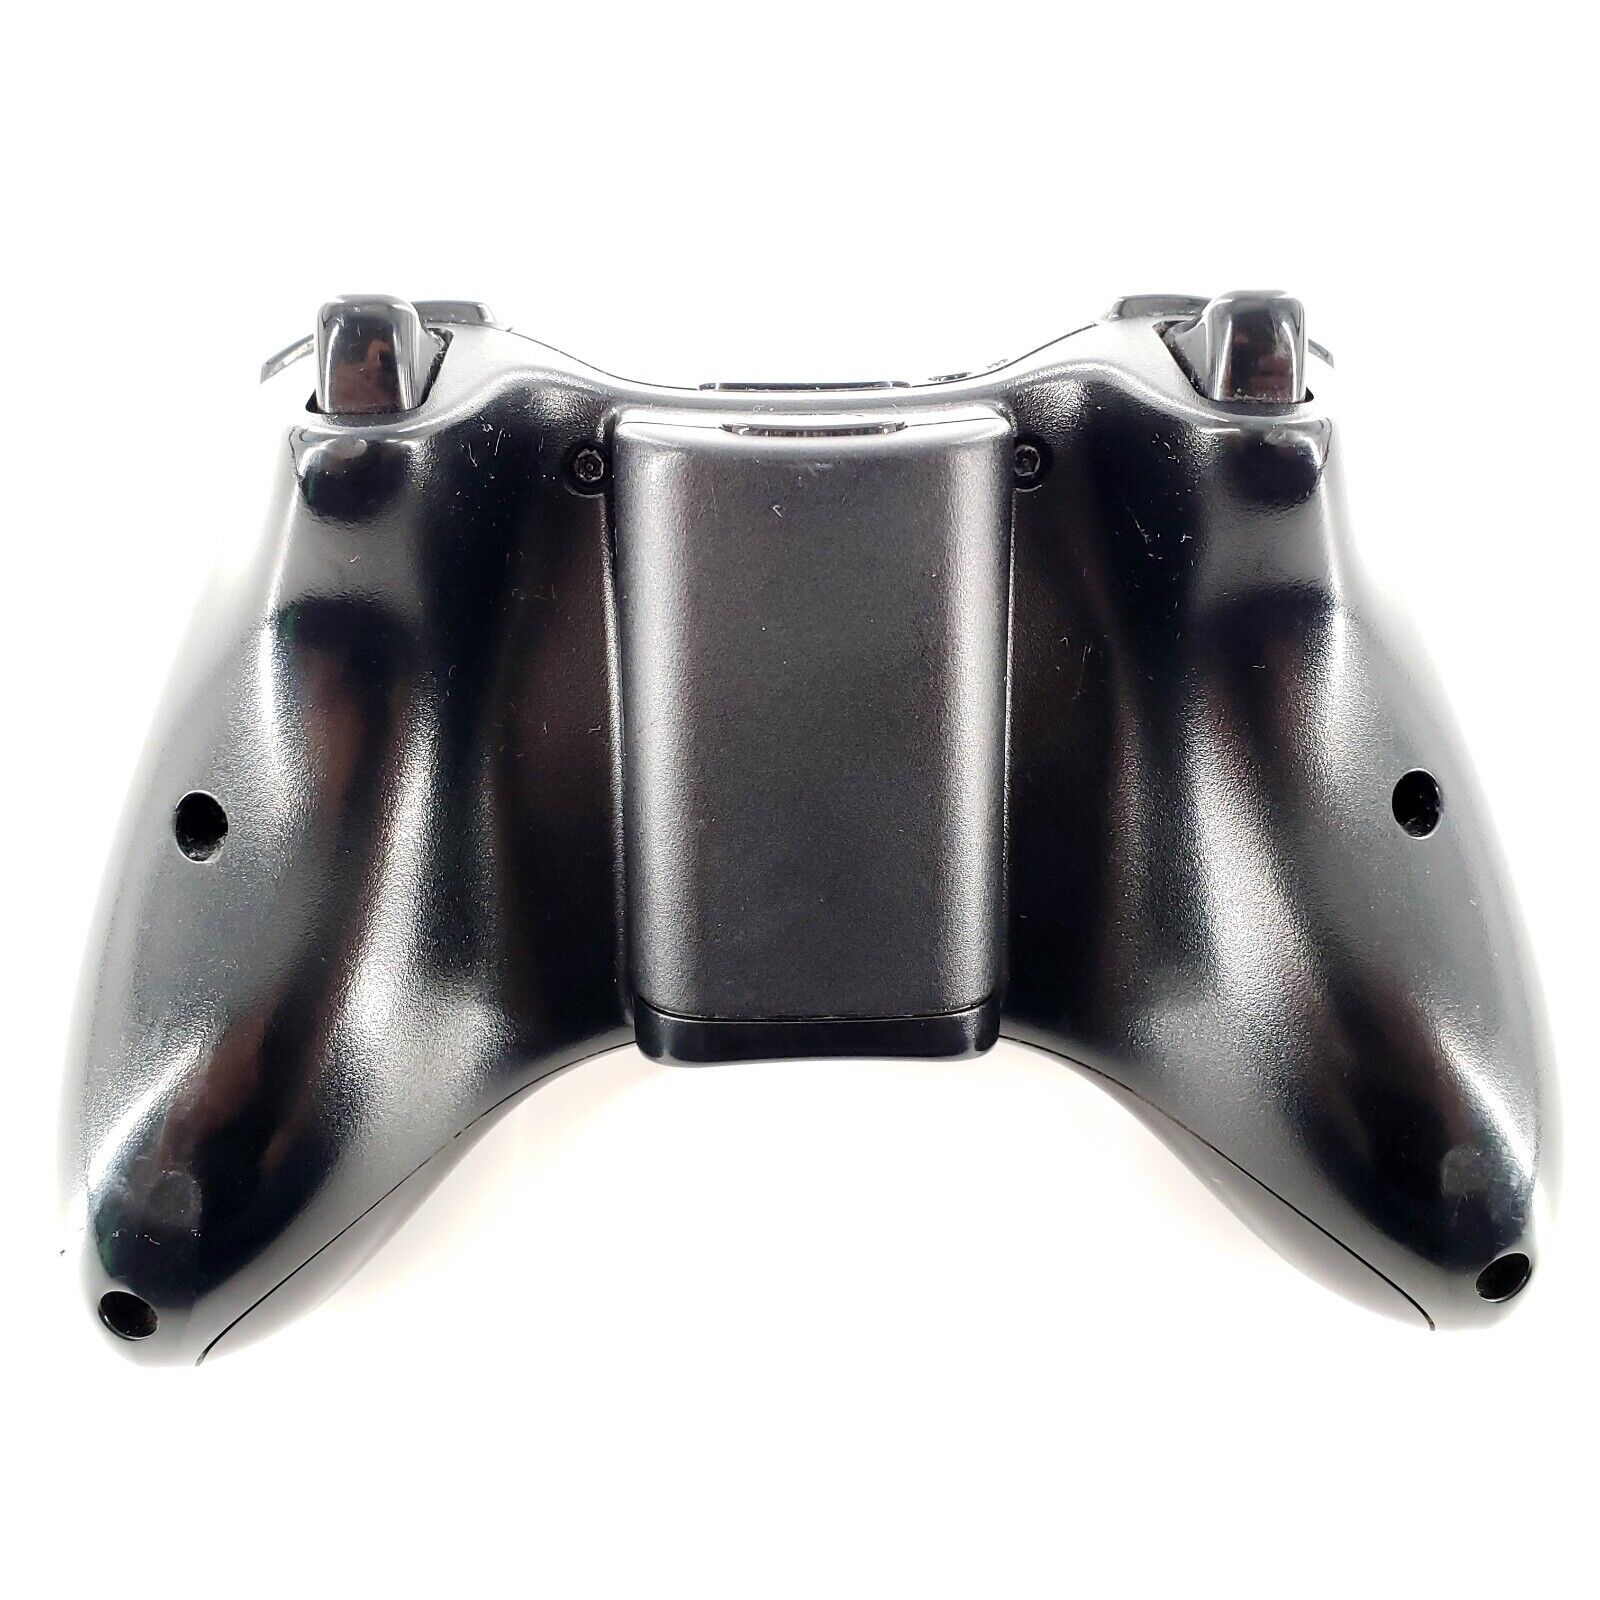 GTAutoSprint  Hold A to sprint for Xbox 360 Controller 